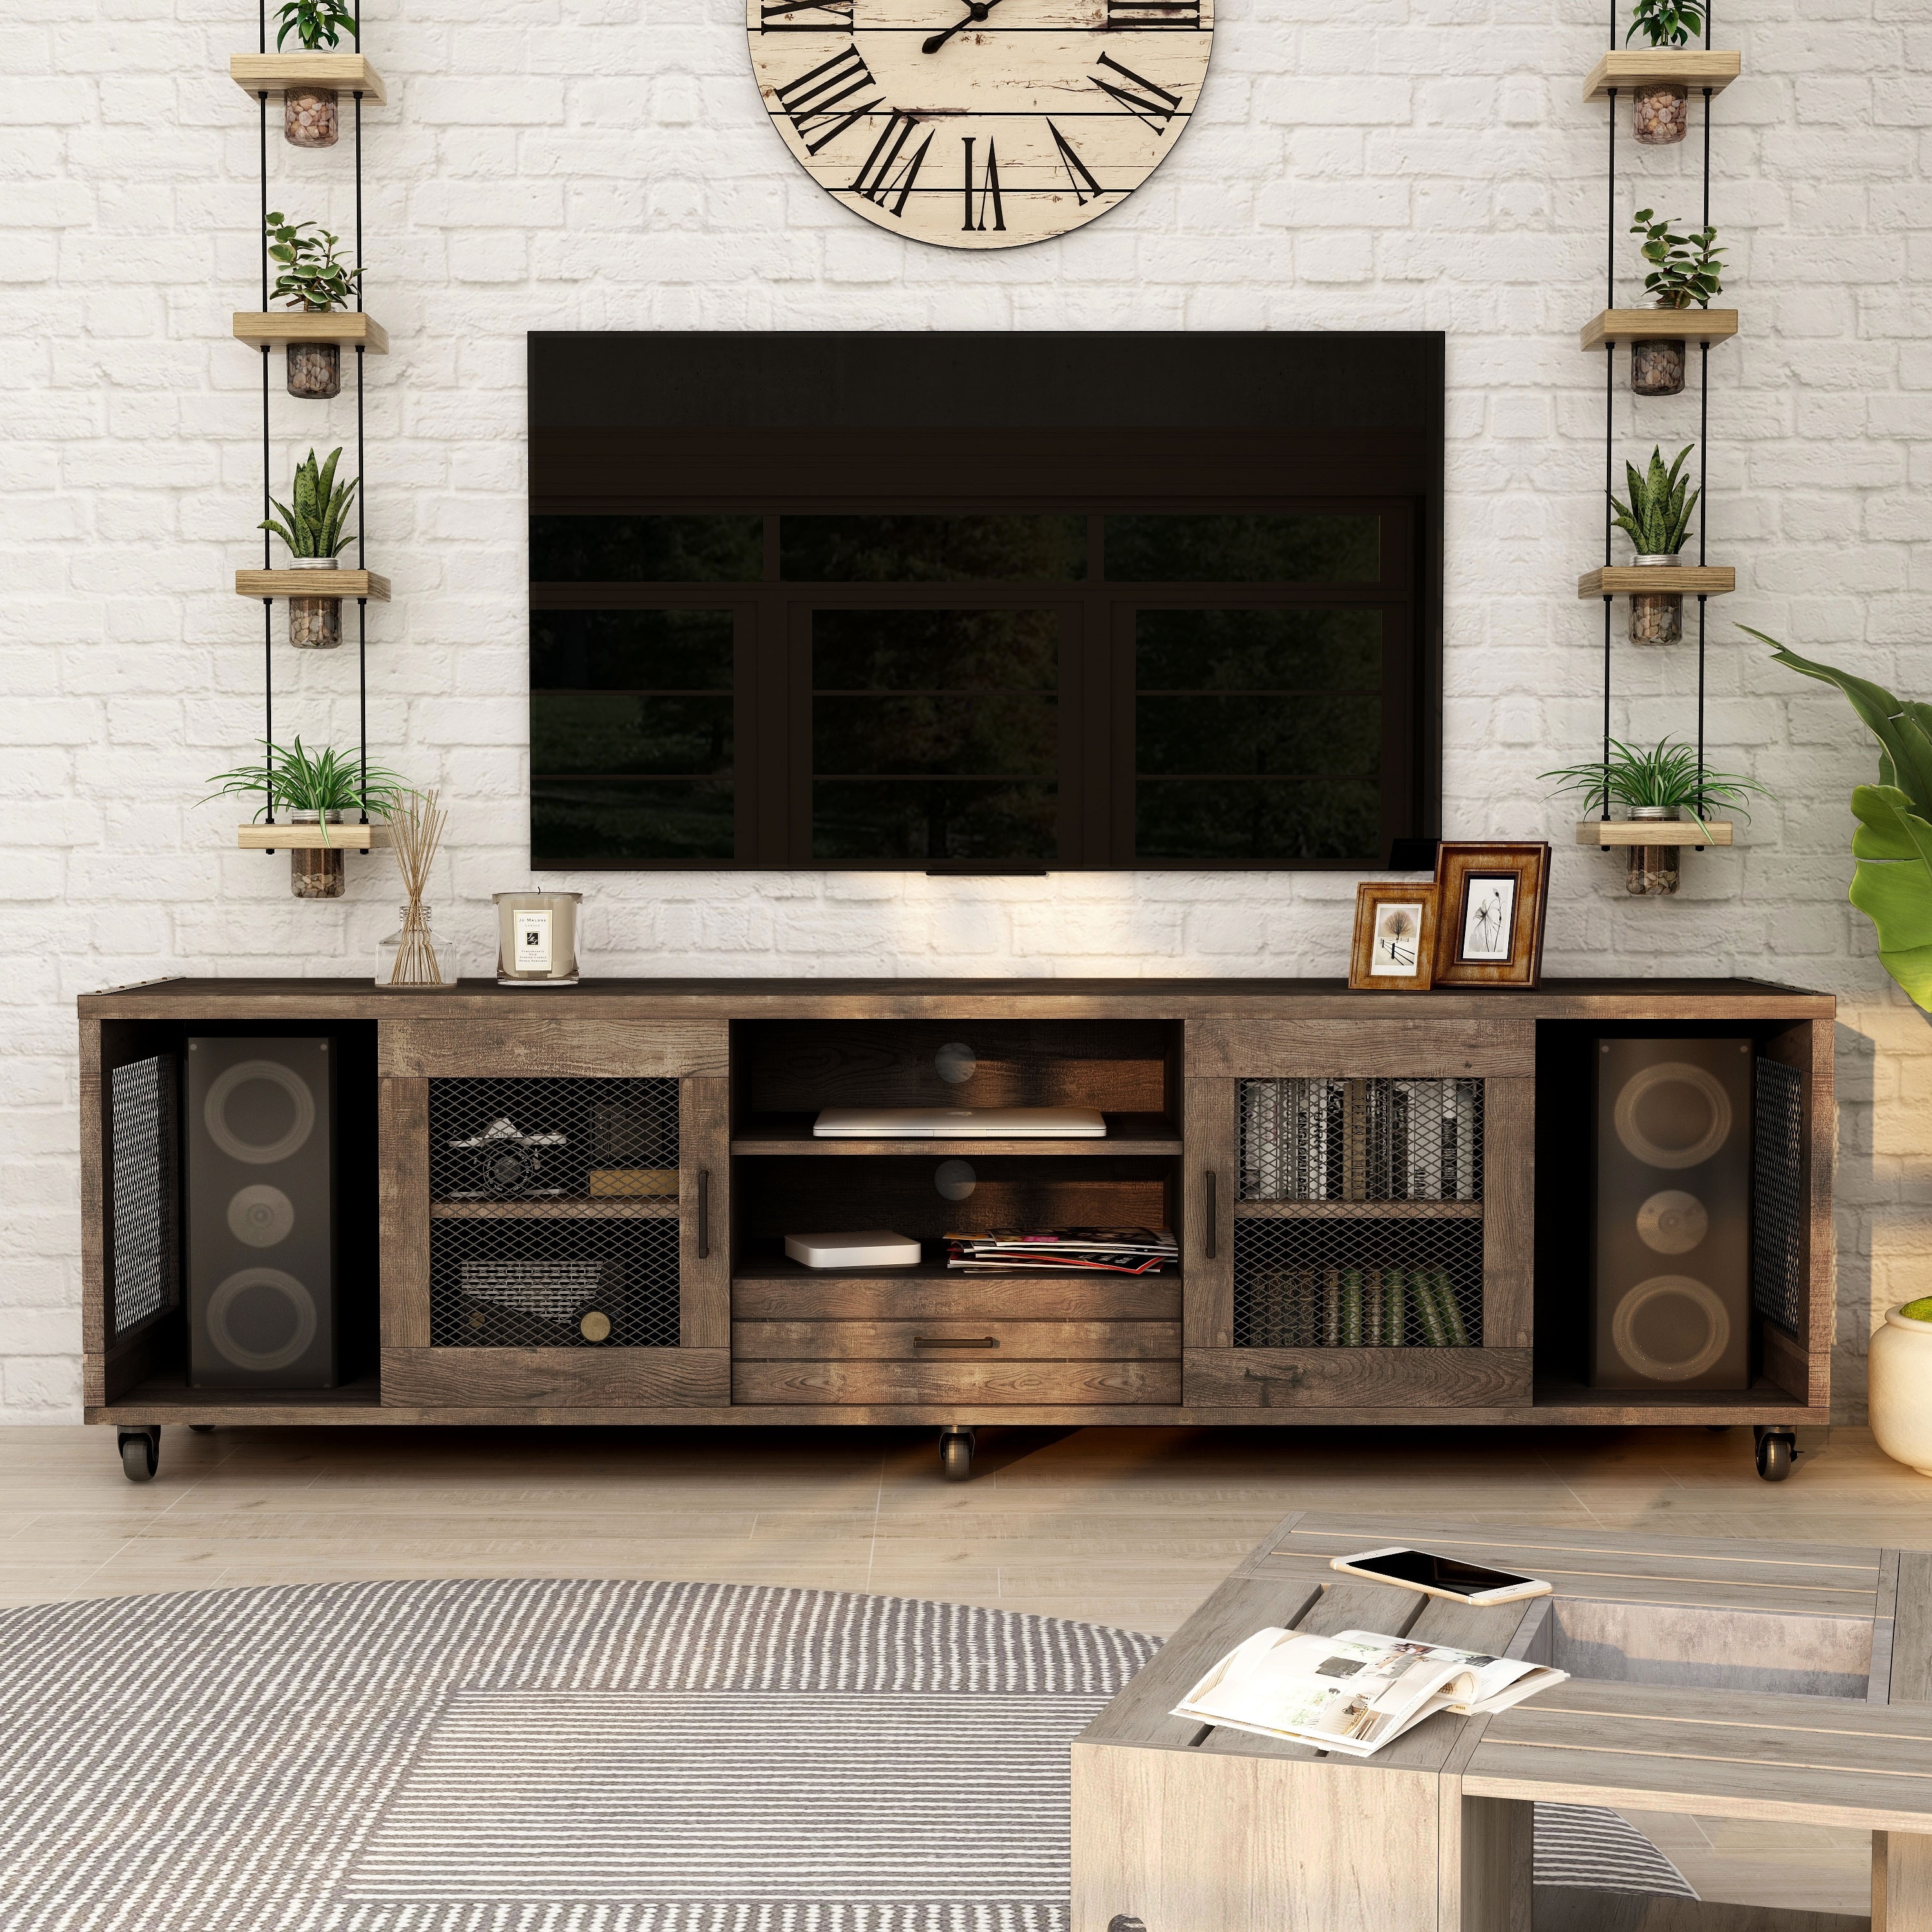 Featured image of post Wood Living Room Wood Tv Stand Images - Wood, tv stands tv stands &amp; entertainment centers :